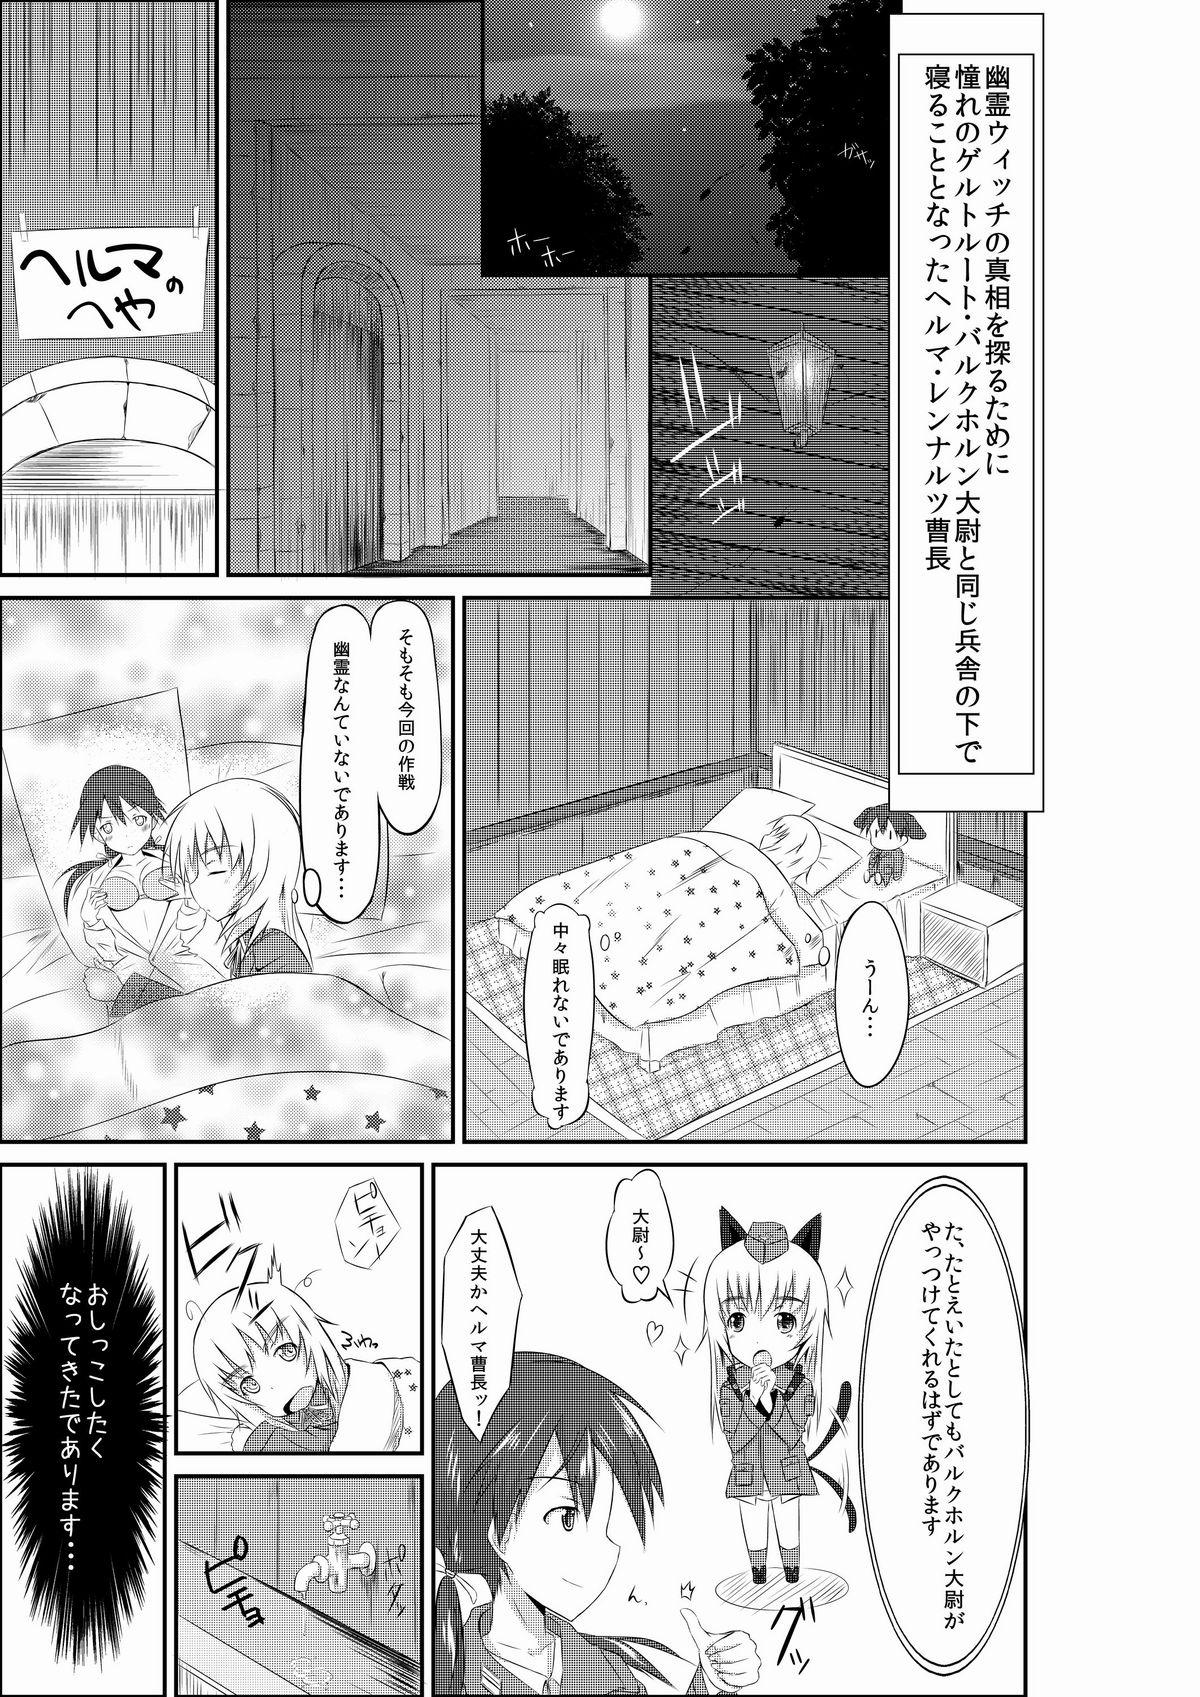 Gaping 練習 お姉ちゃんとヘルマちゃん - Strike witches Juggs - Picture 1